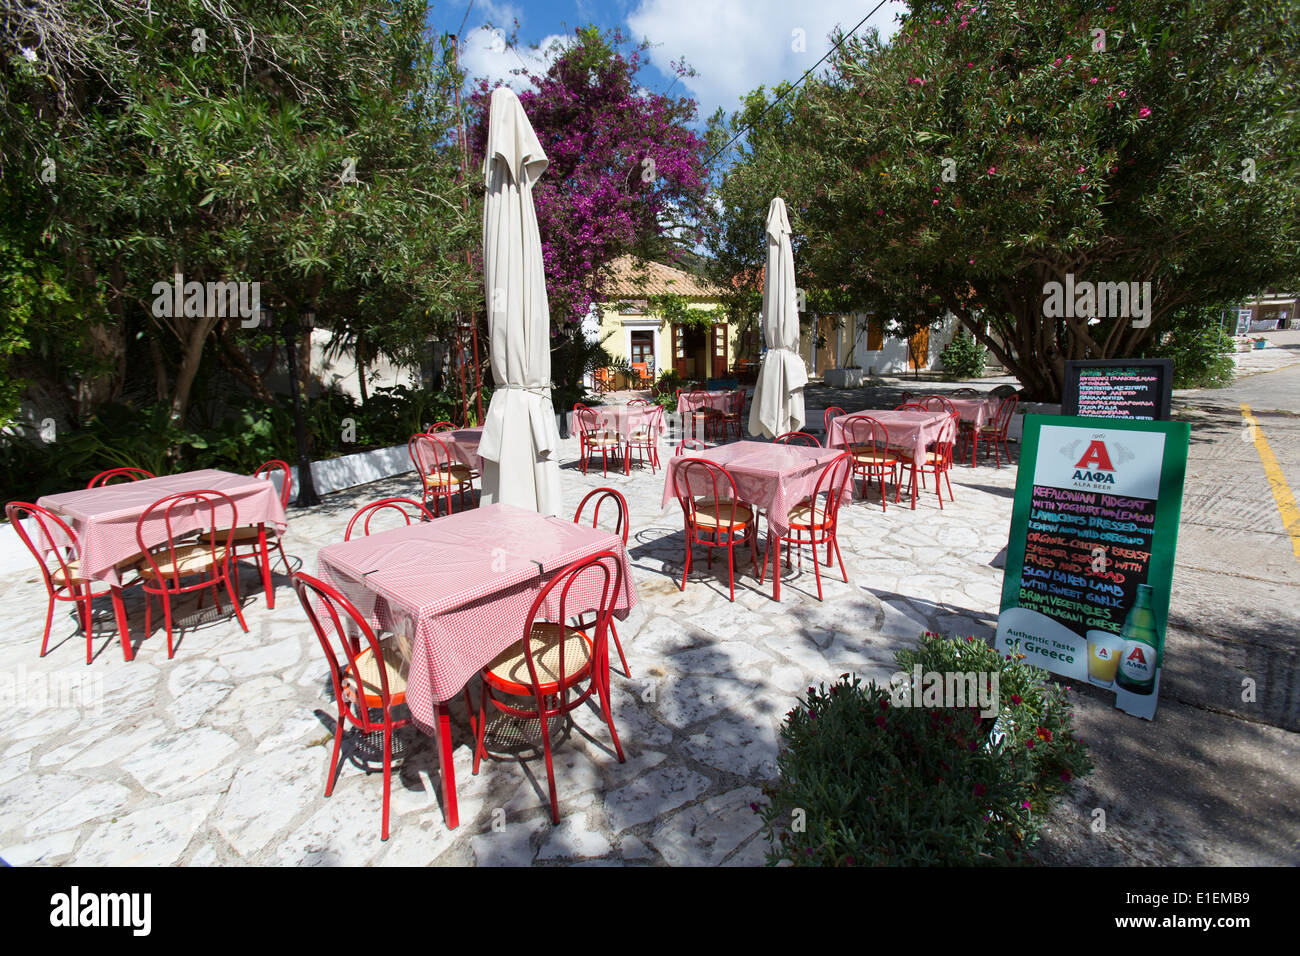 Village of Assos, Kefalonia. Picturesque view of an empty restaurant in the village of Assos. Stock Photo